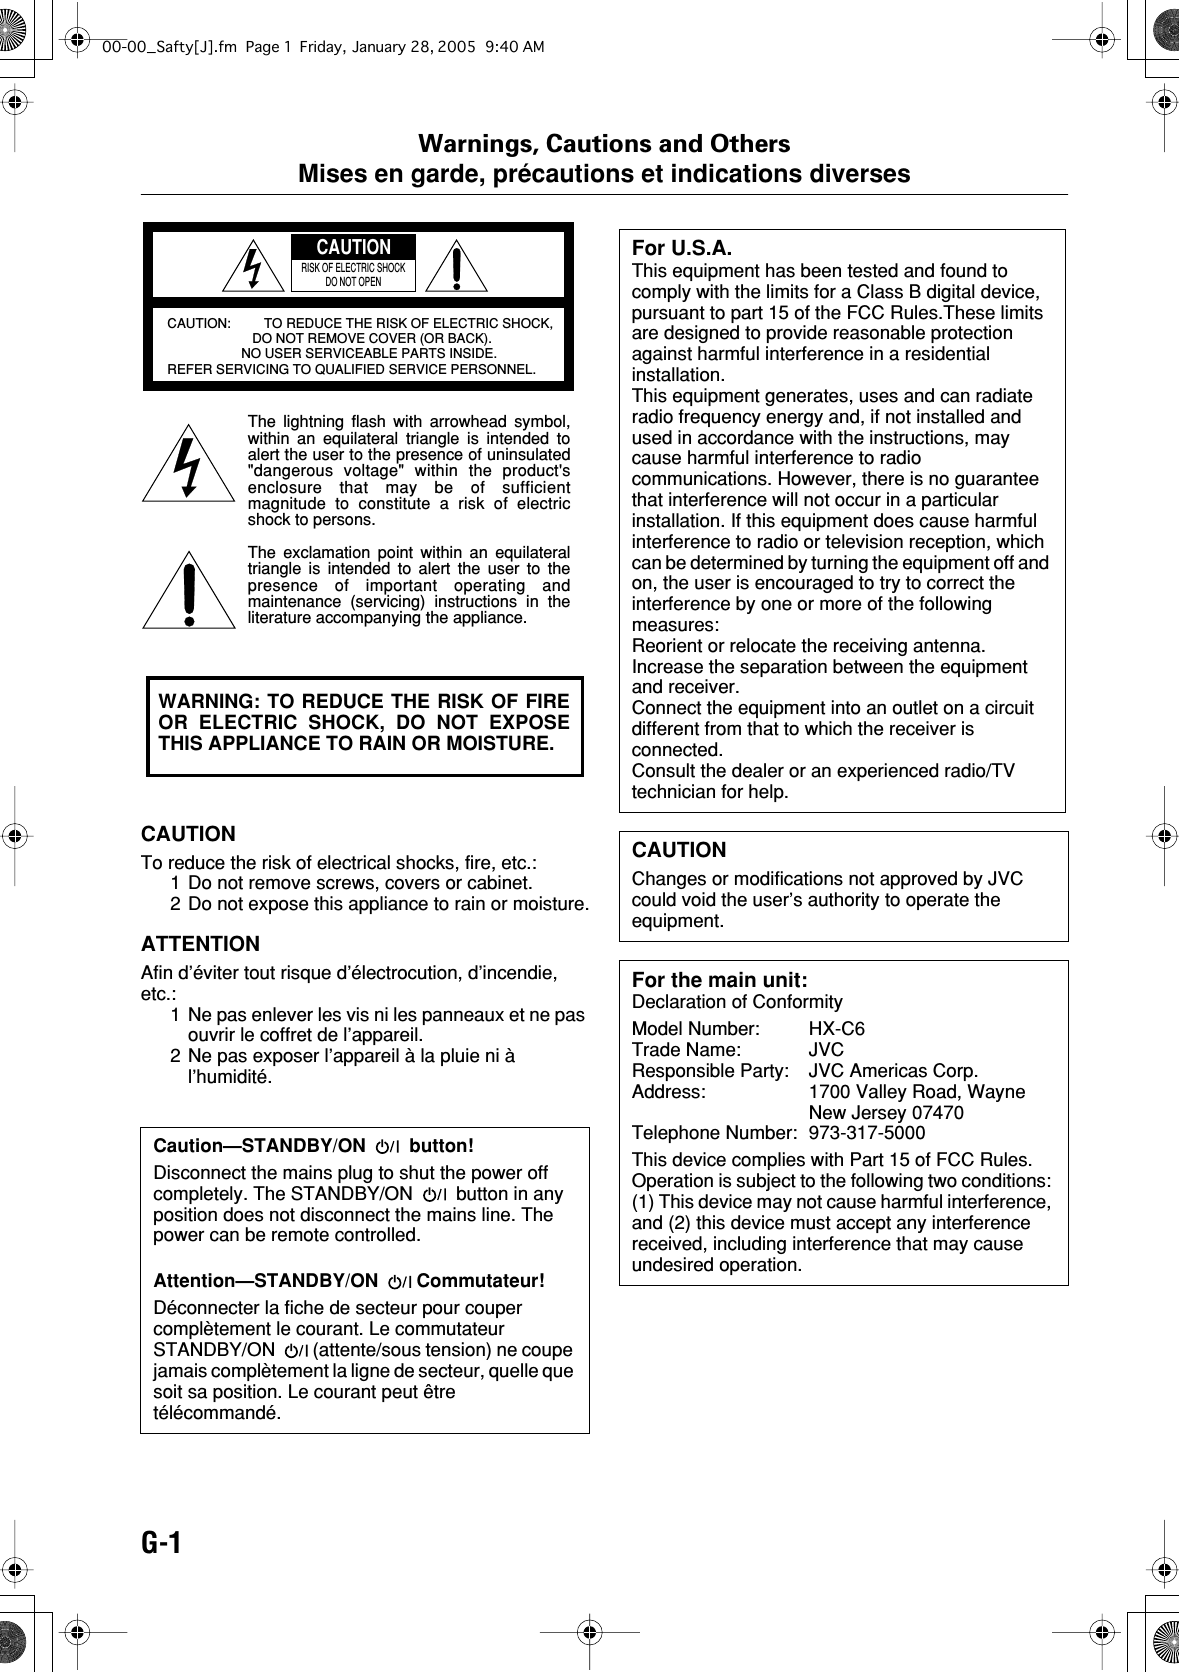 Samsung Electronics Co Hxc6 Compact Component System User Manual Hx C6 J